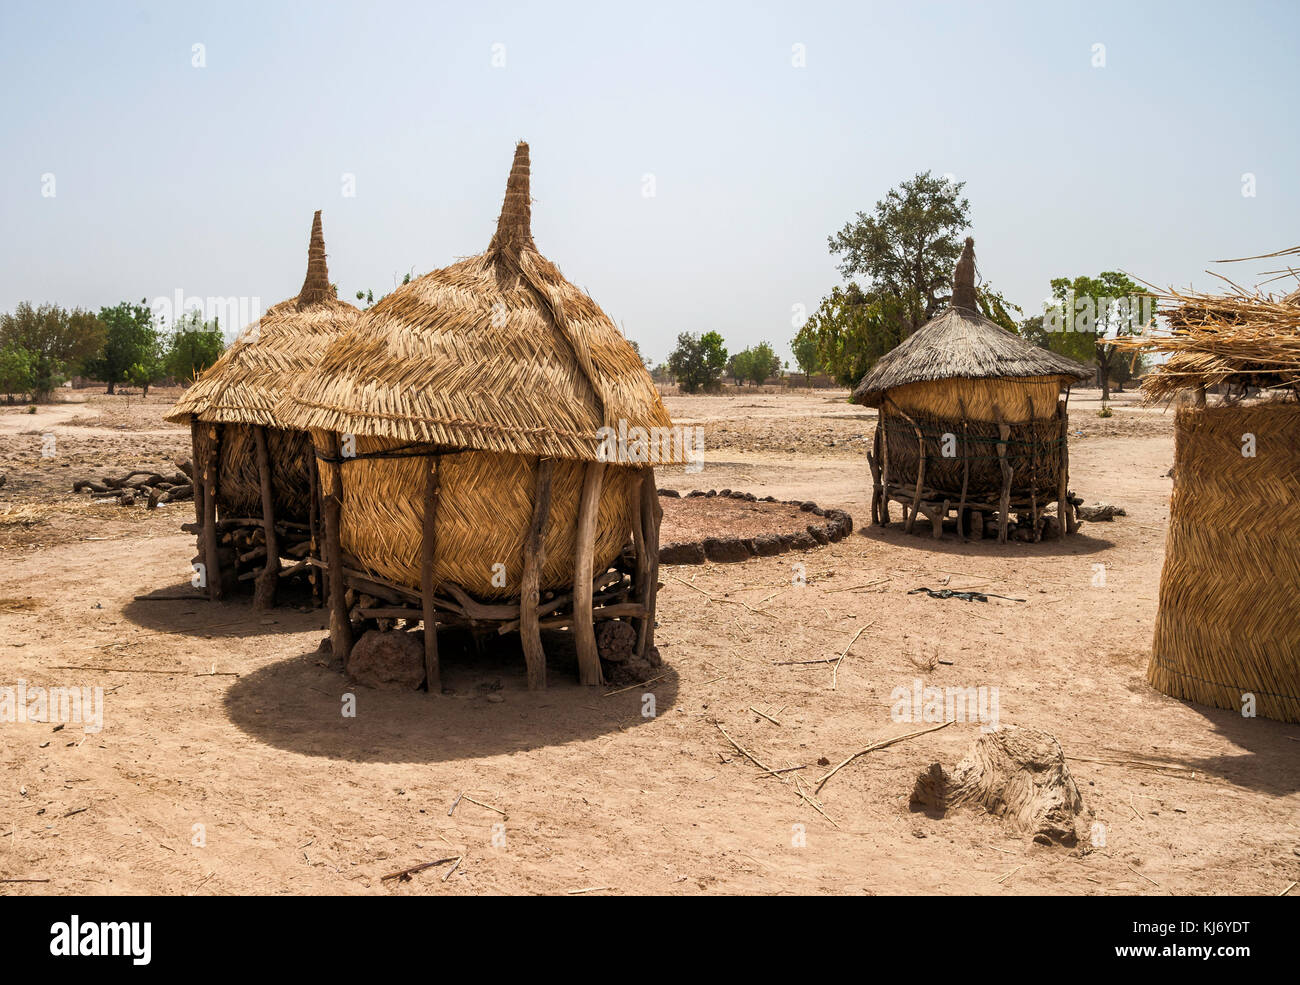 Three granaries used to store the crops in an mosi village of Burkina Faso. Stock Photo